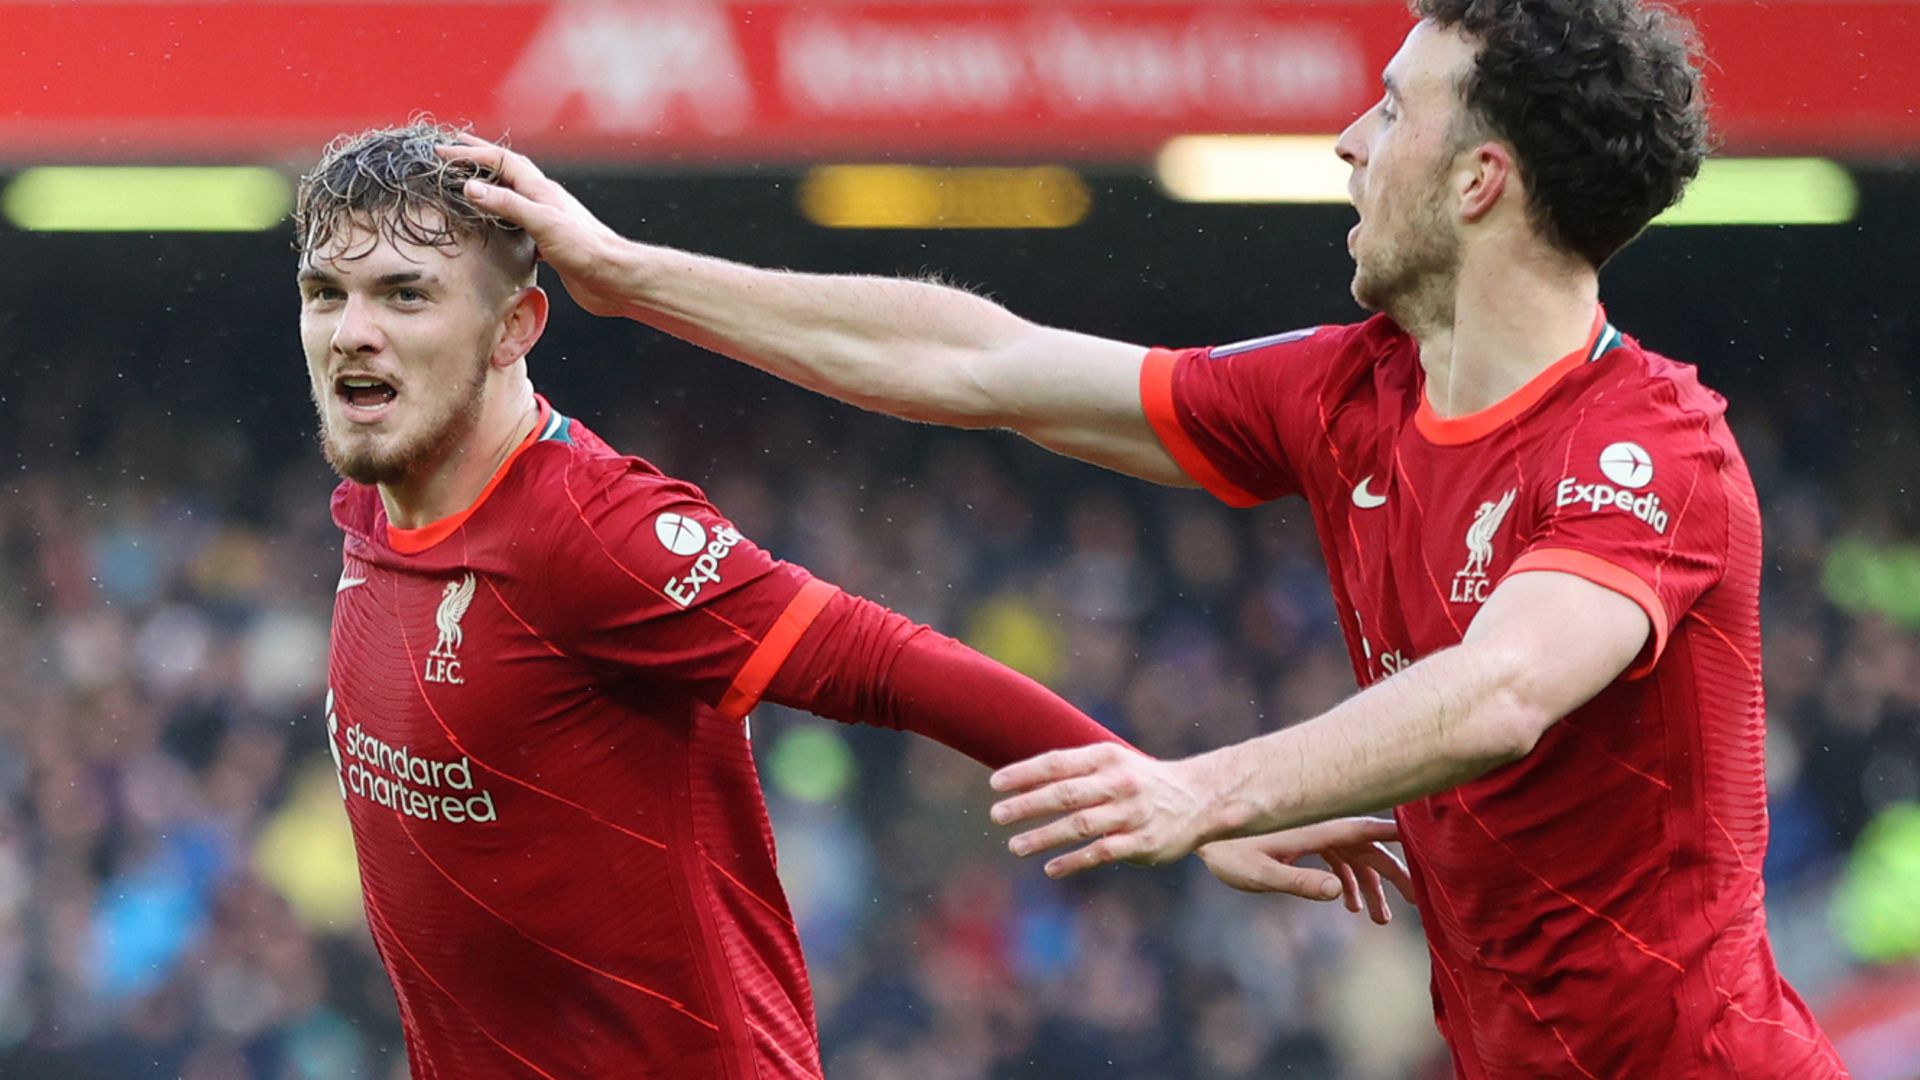 Liverpool 3-1 Cardiff: Harvey Elliott scores on return from injury as Reds advance to FA Cup fifth round